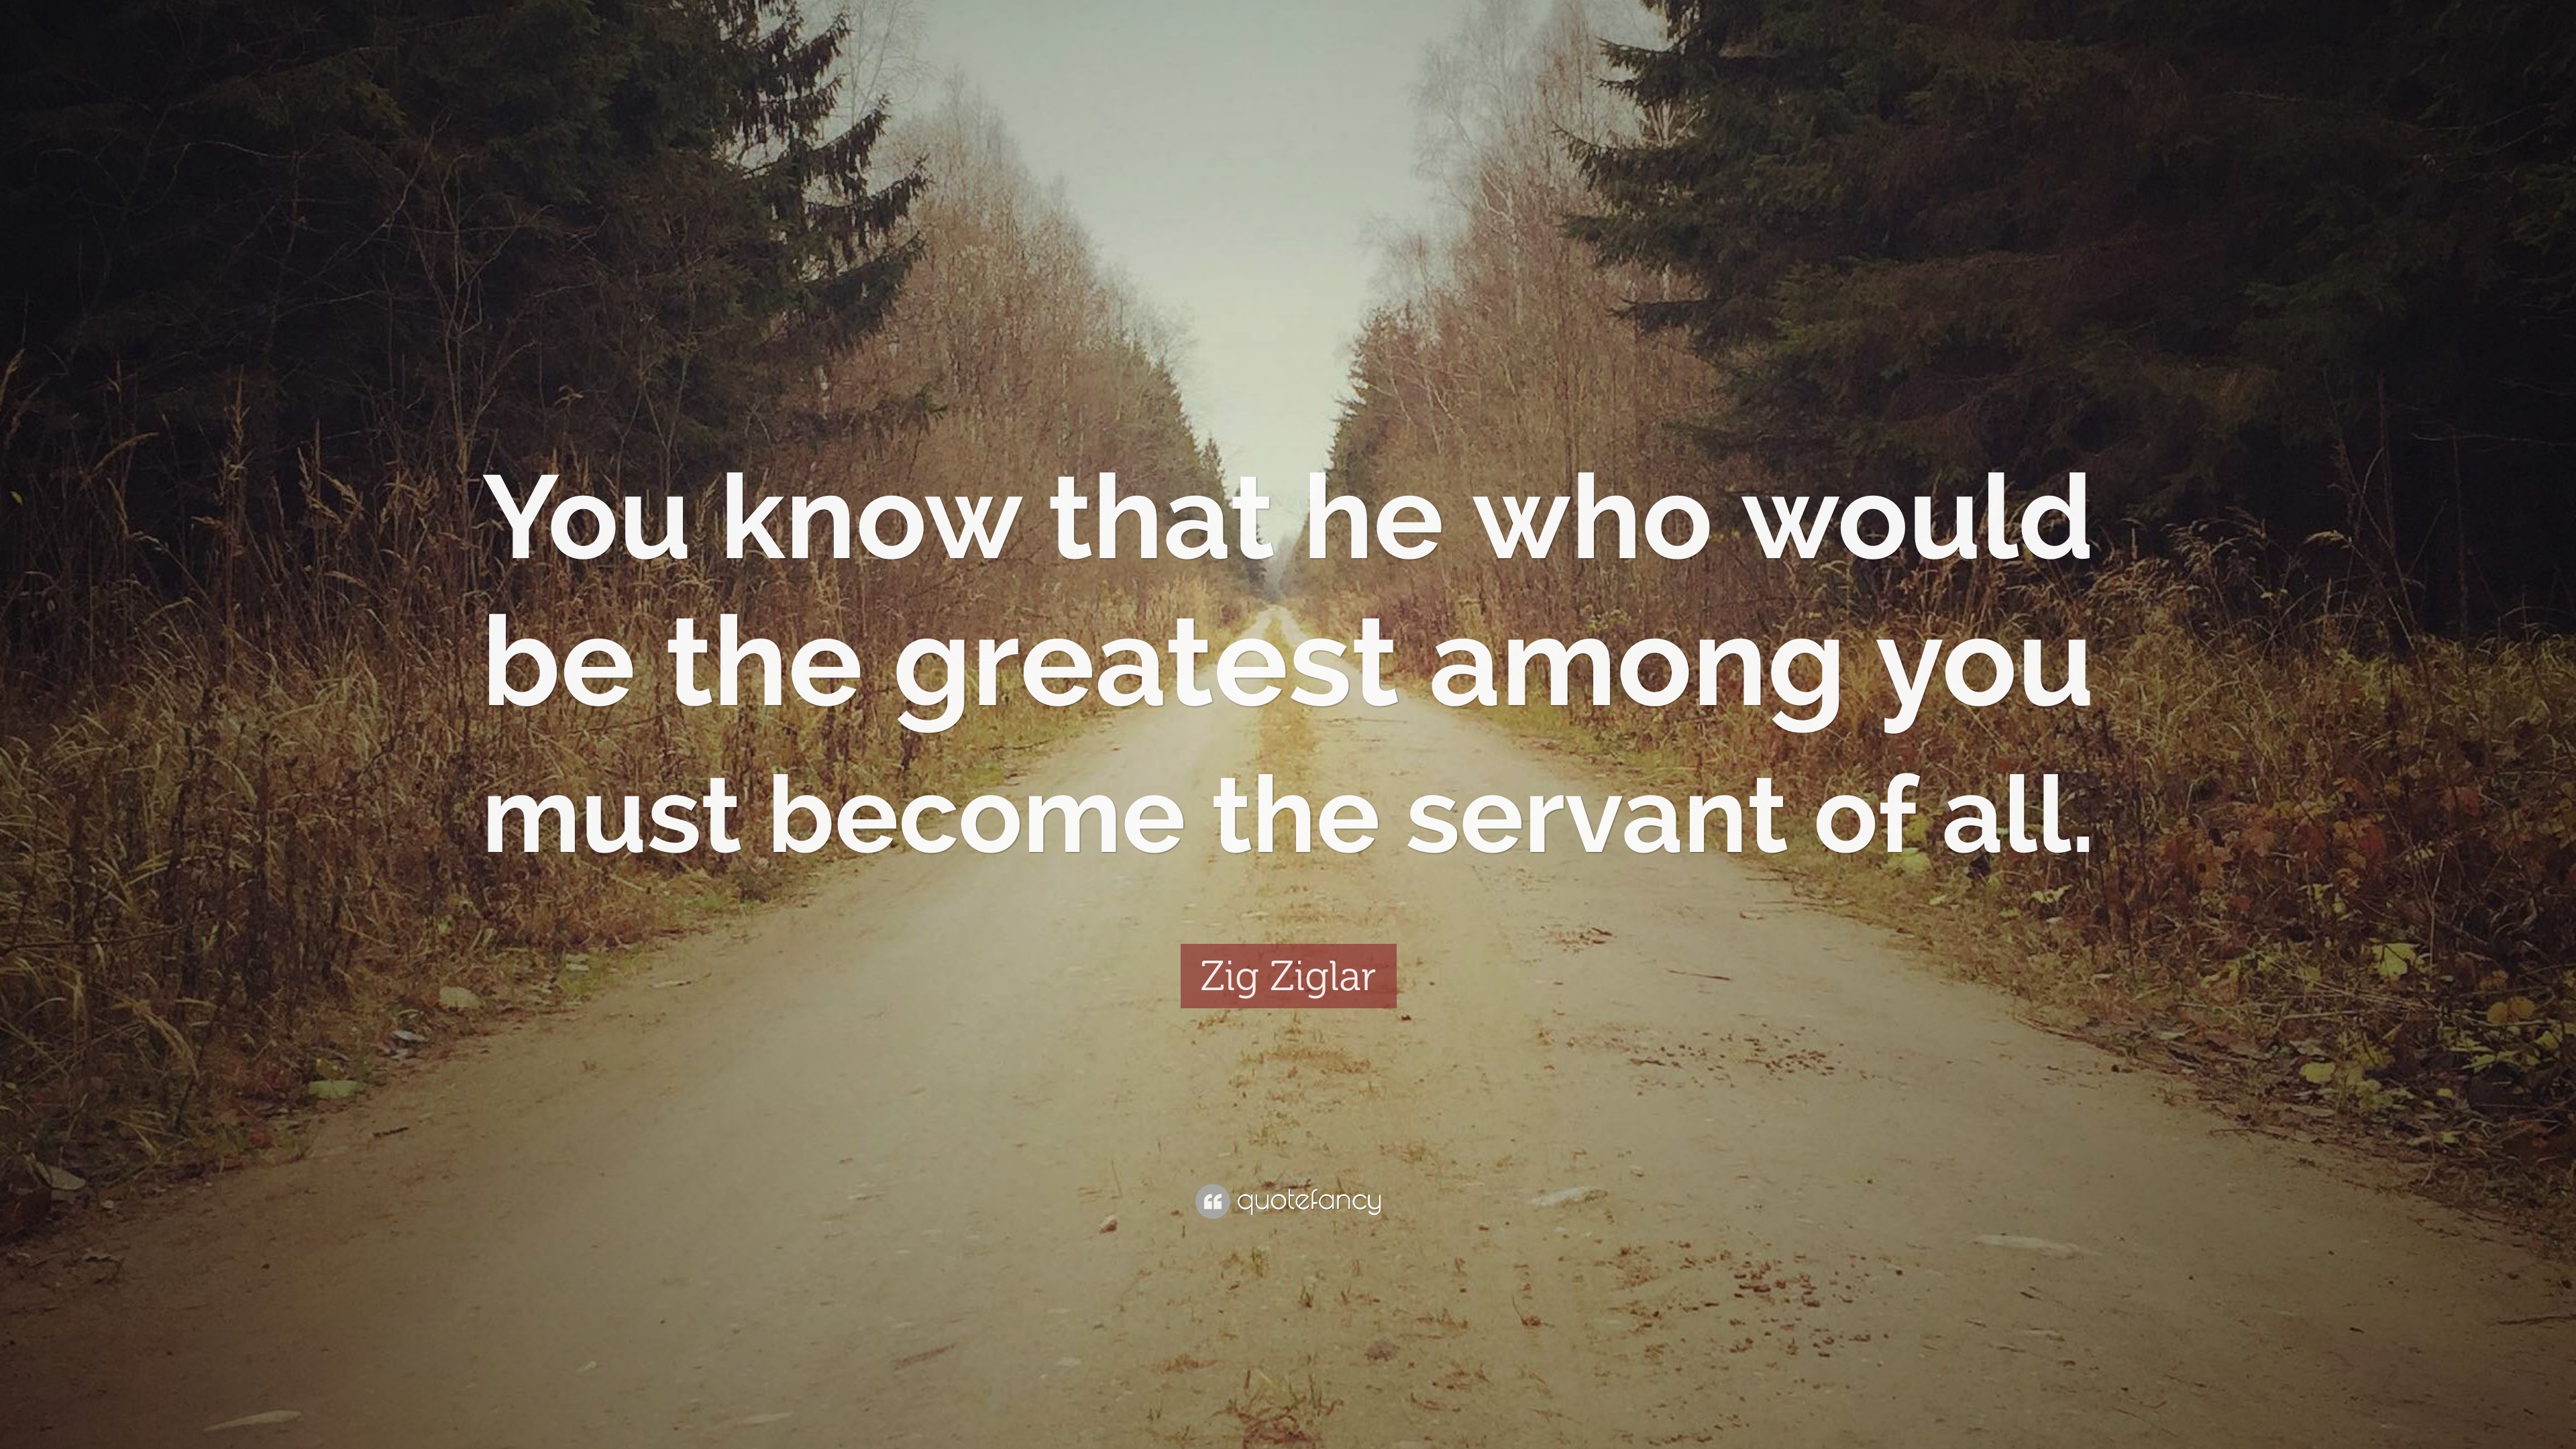 Zig Ziglar Quote: “You know that he who would be the greatest among ...